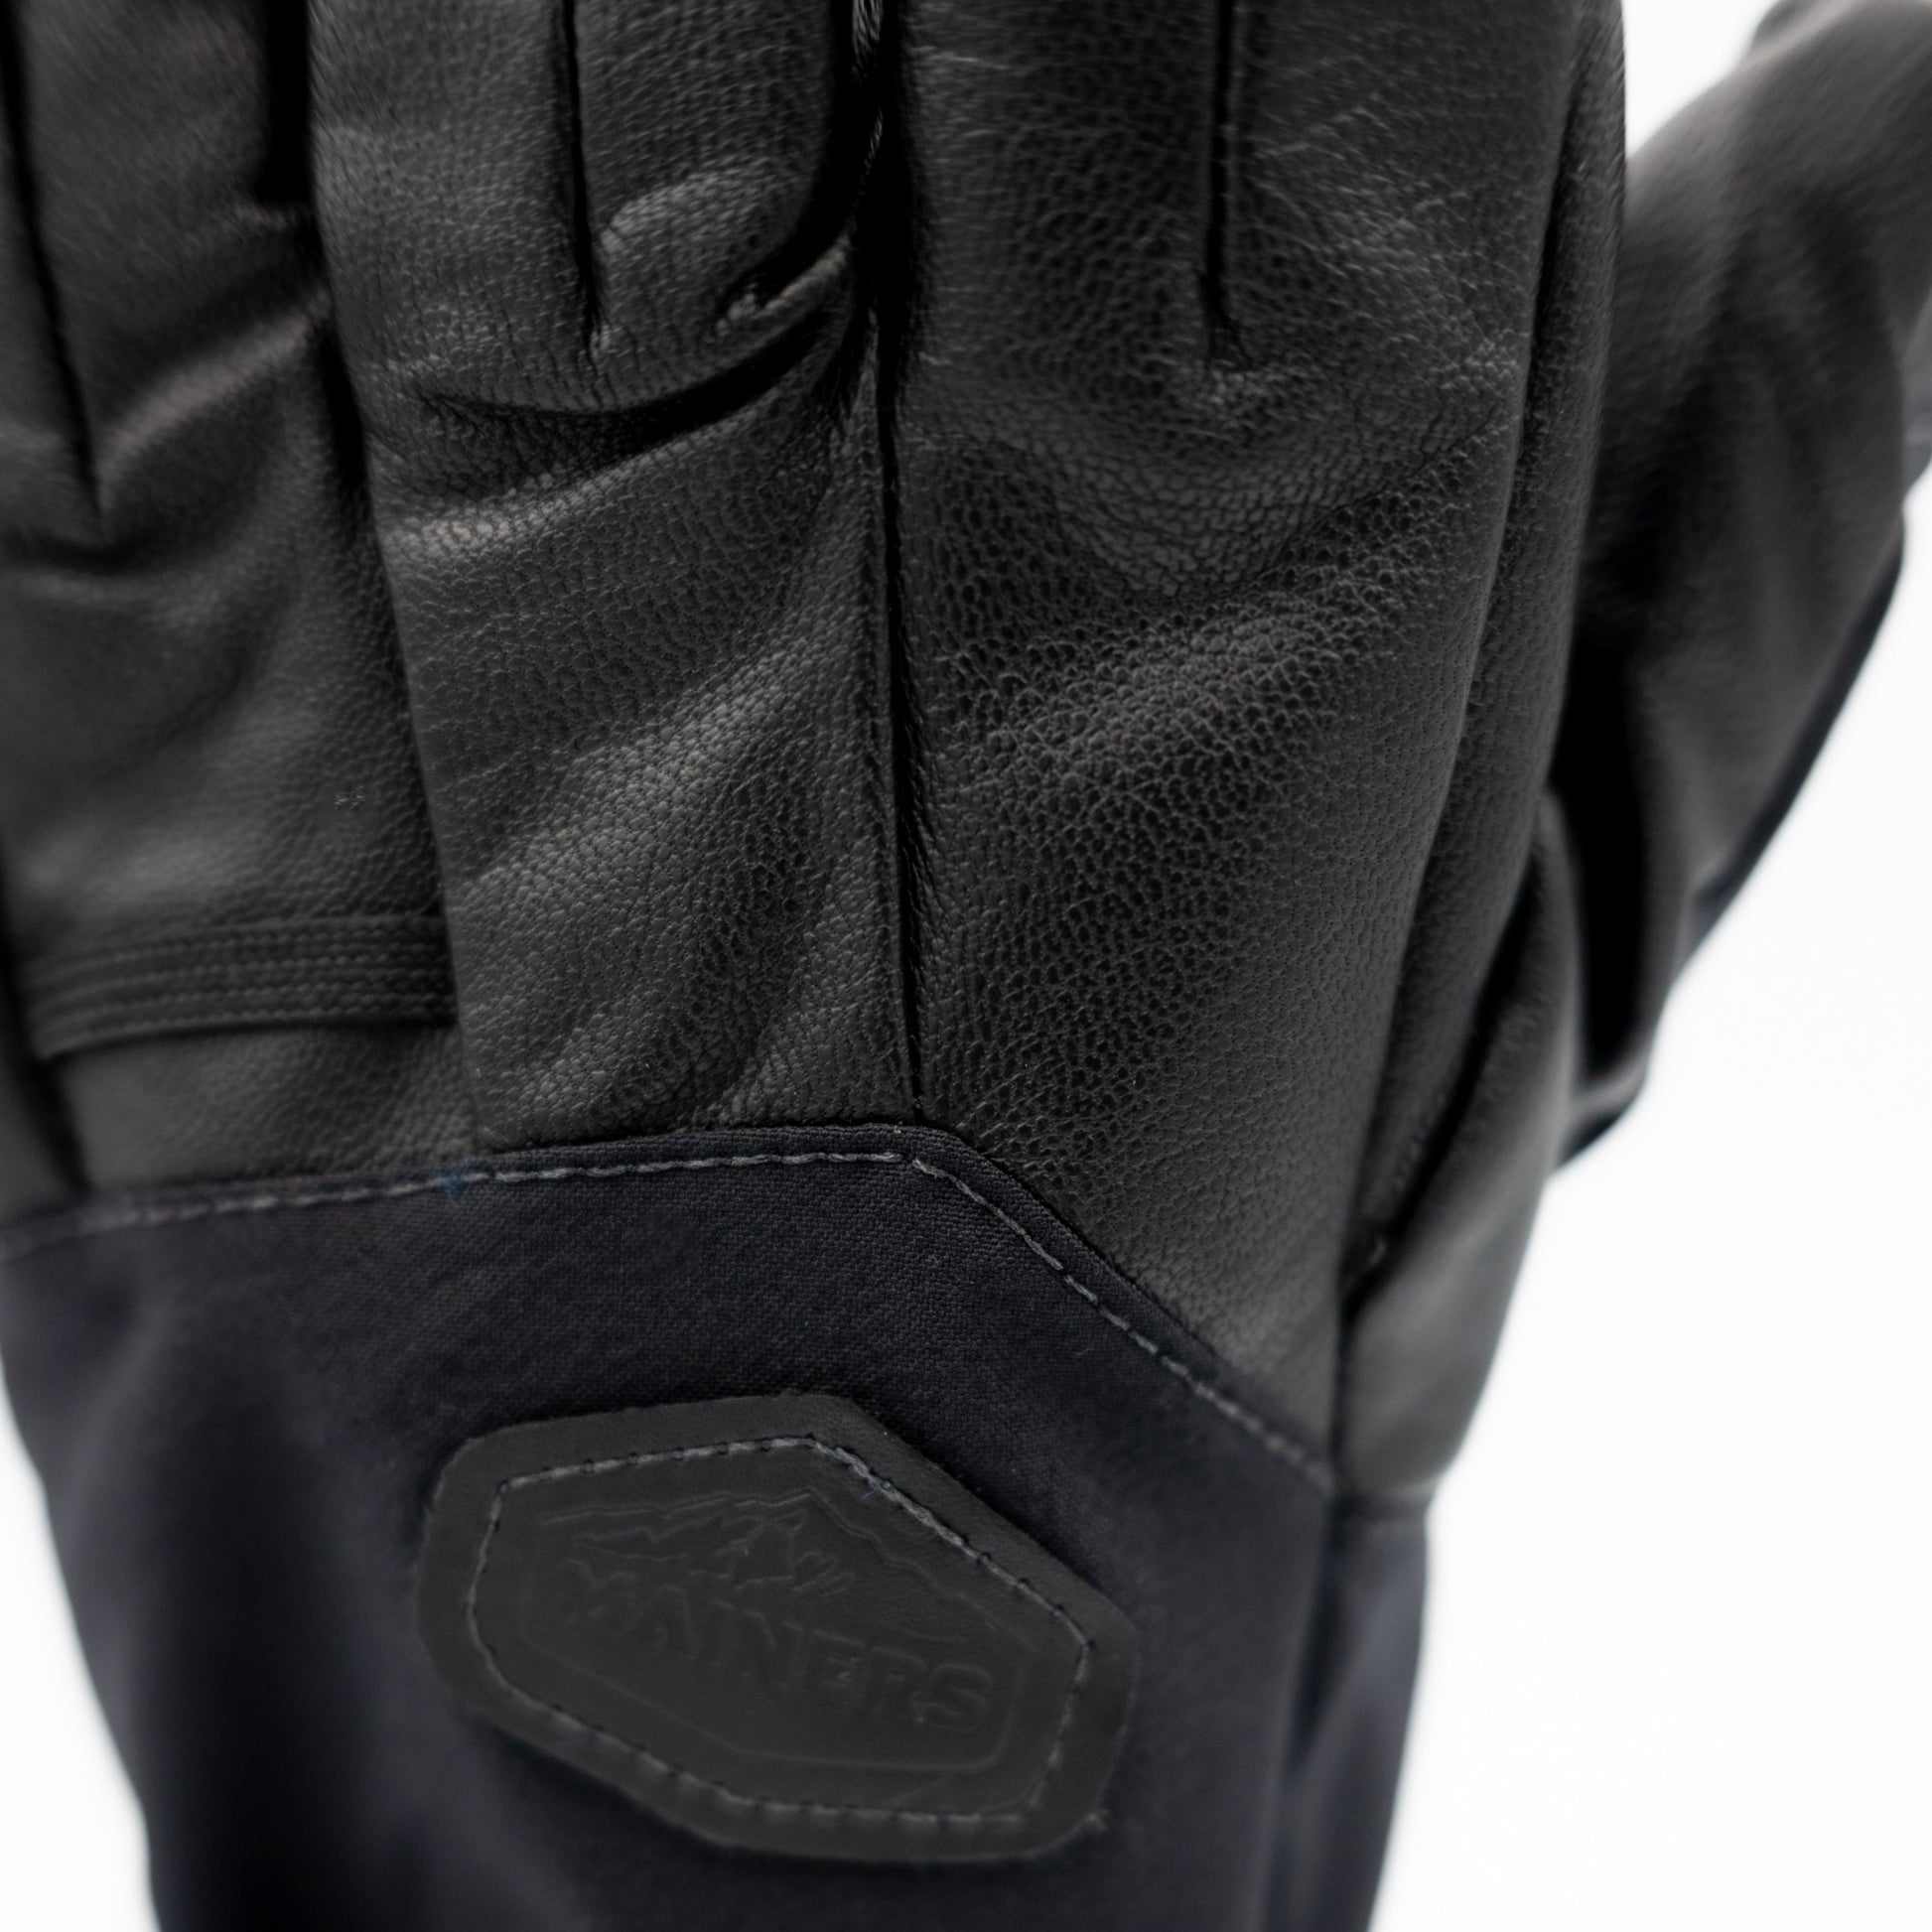 A pair of black Mainers Rangeley gloves with a logo on them.